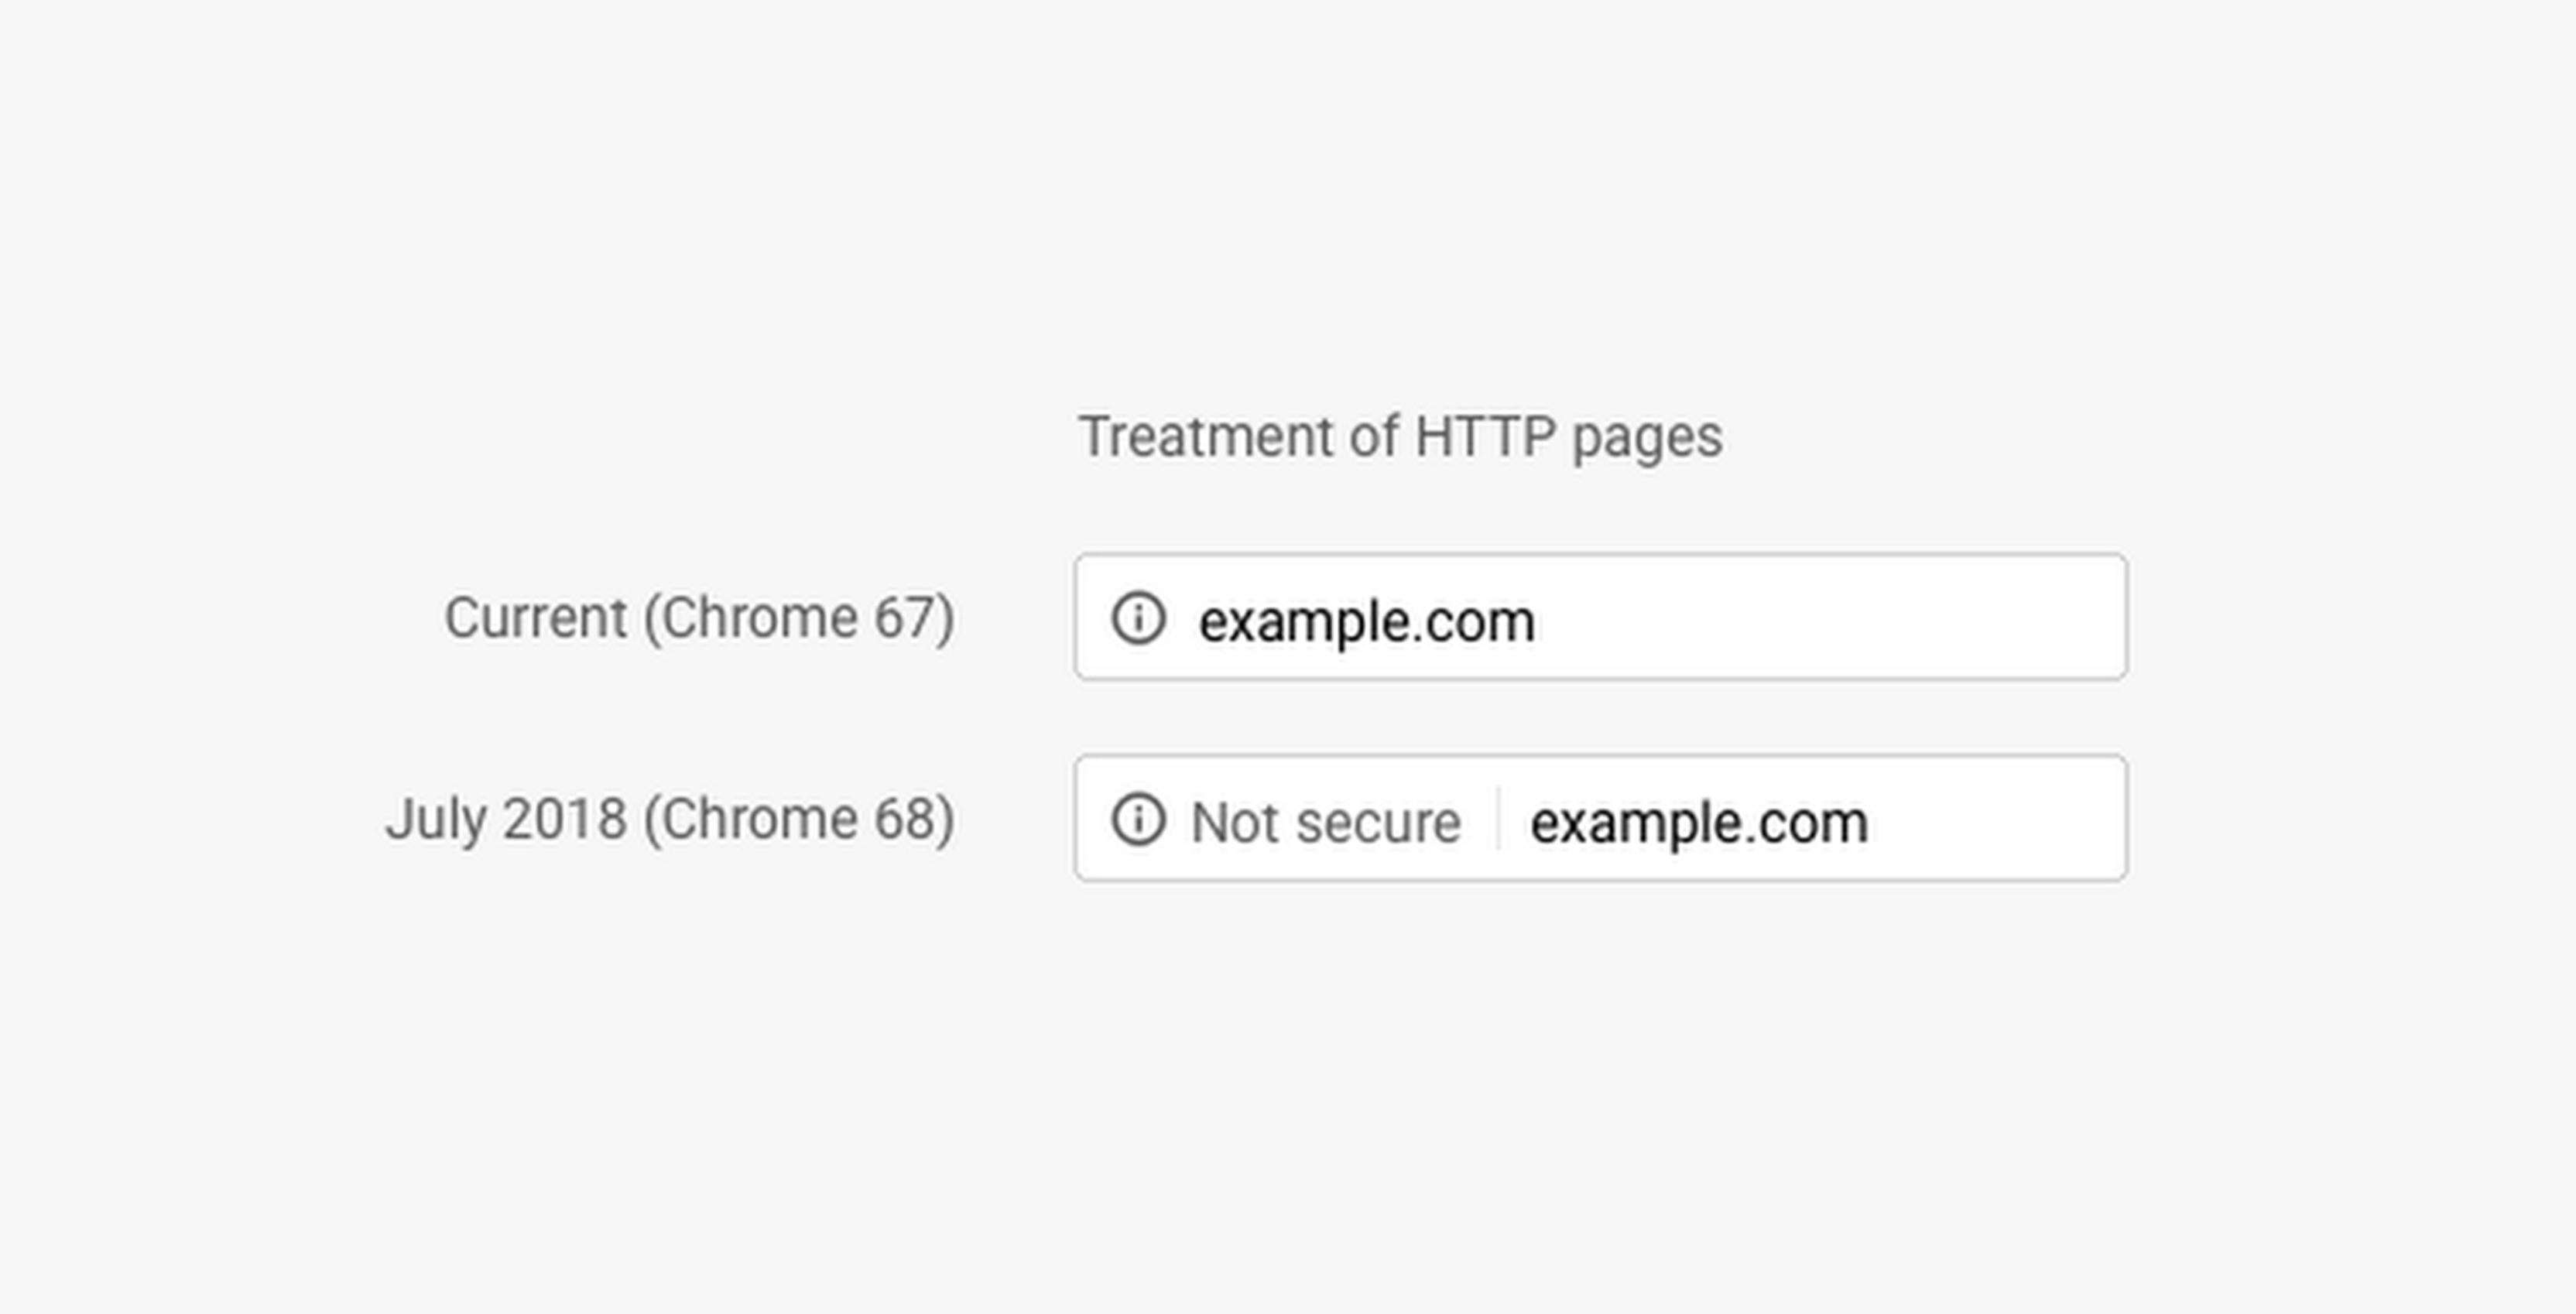 The new Not secure tag in Chrome